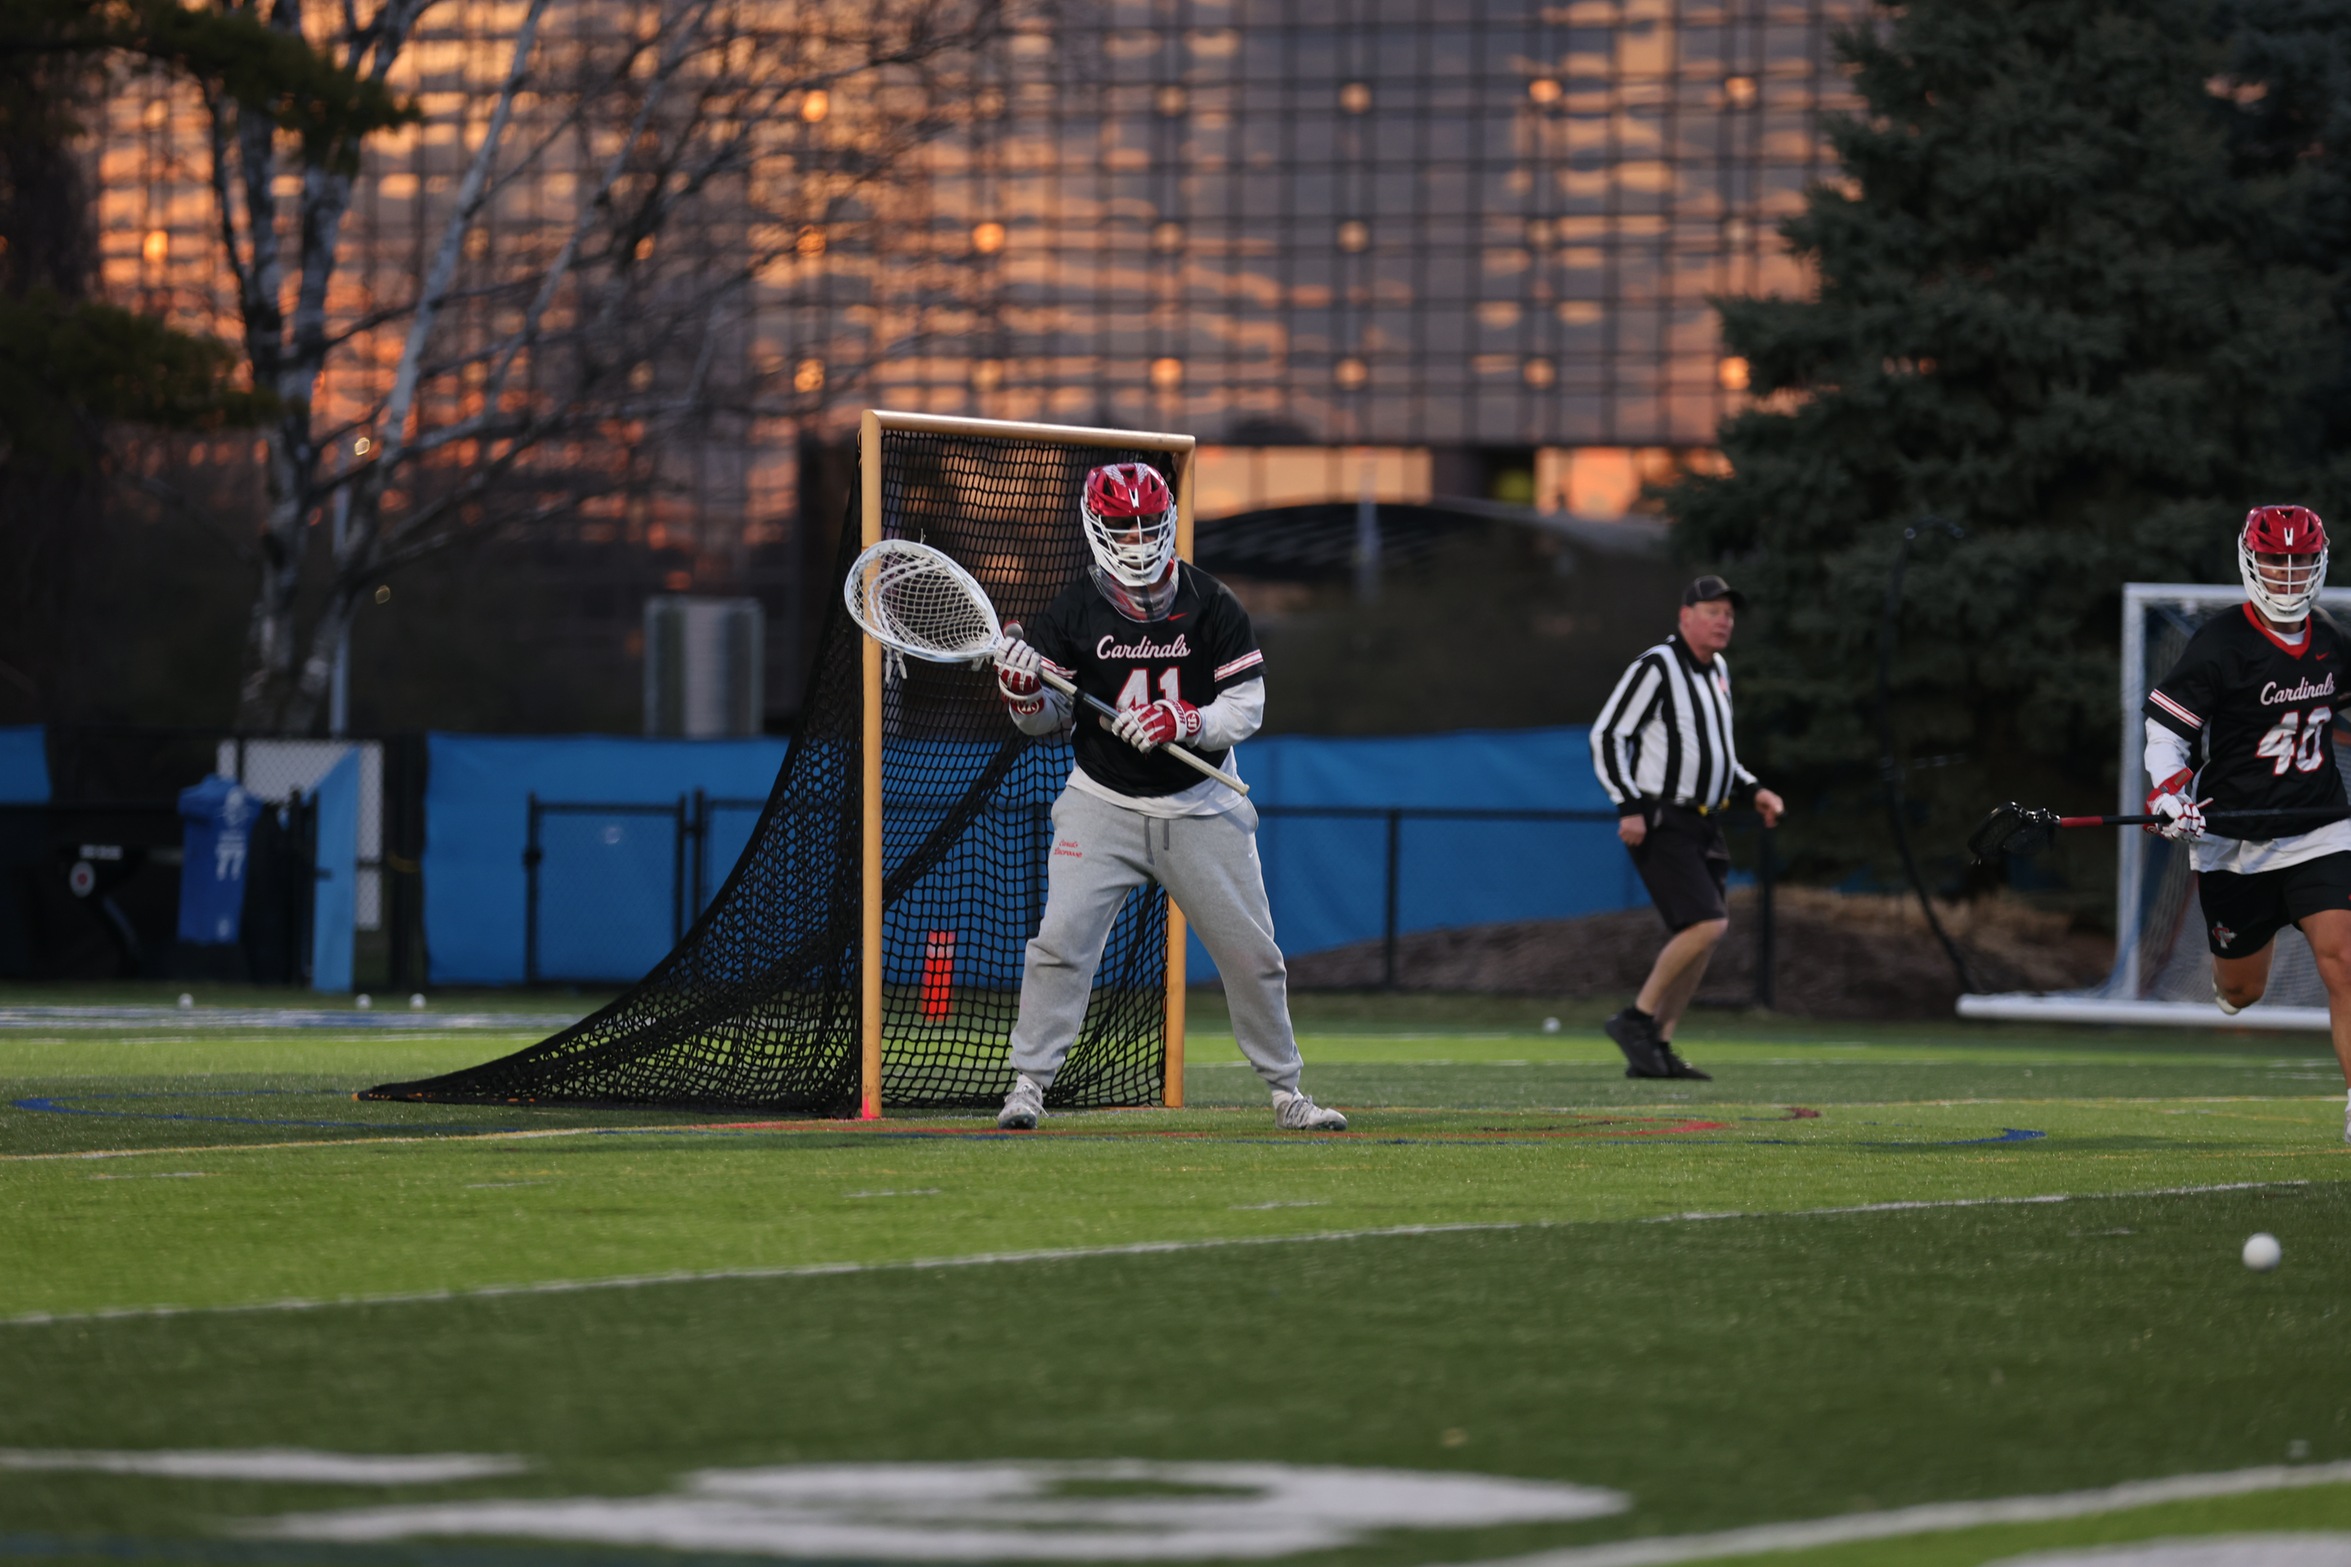 Men's Lacrosse dominates Siena Heights with 26-3 rout